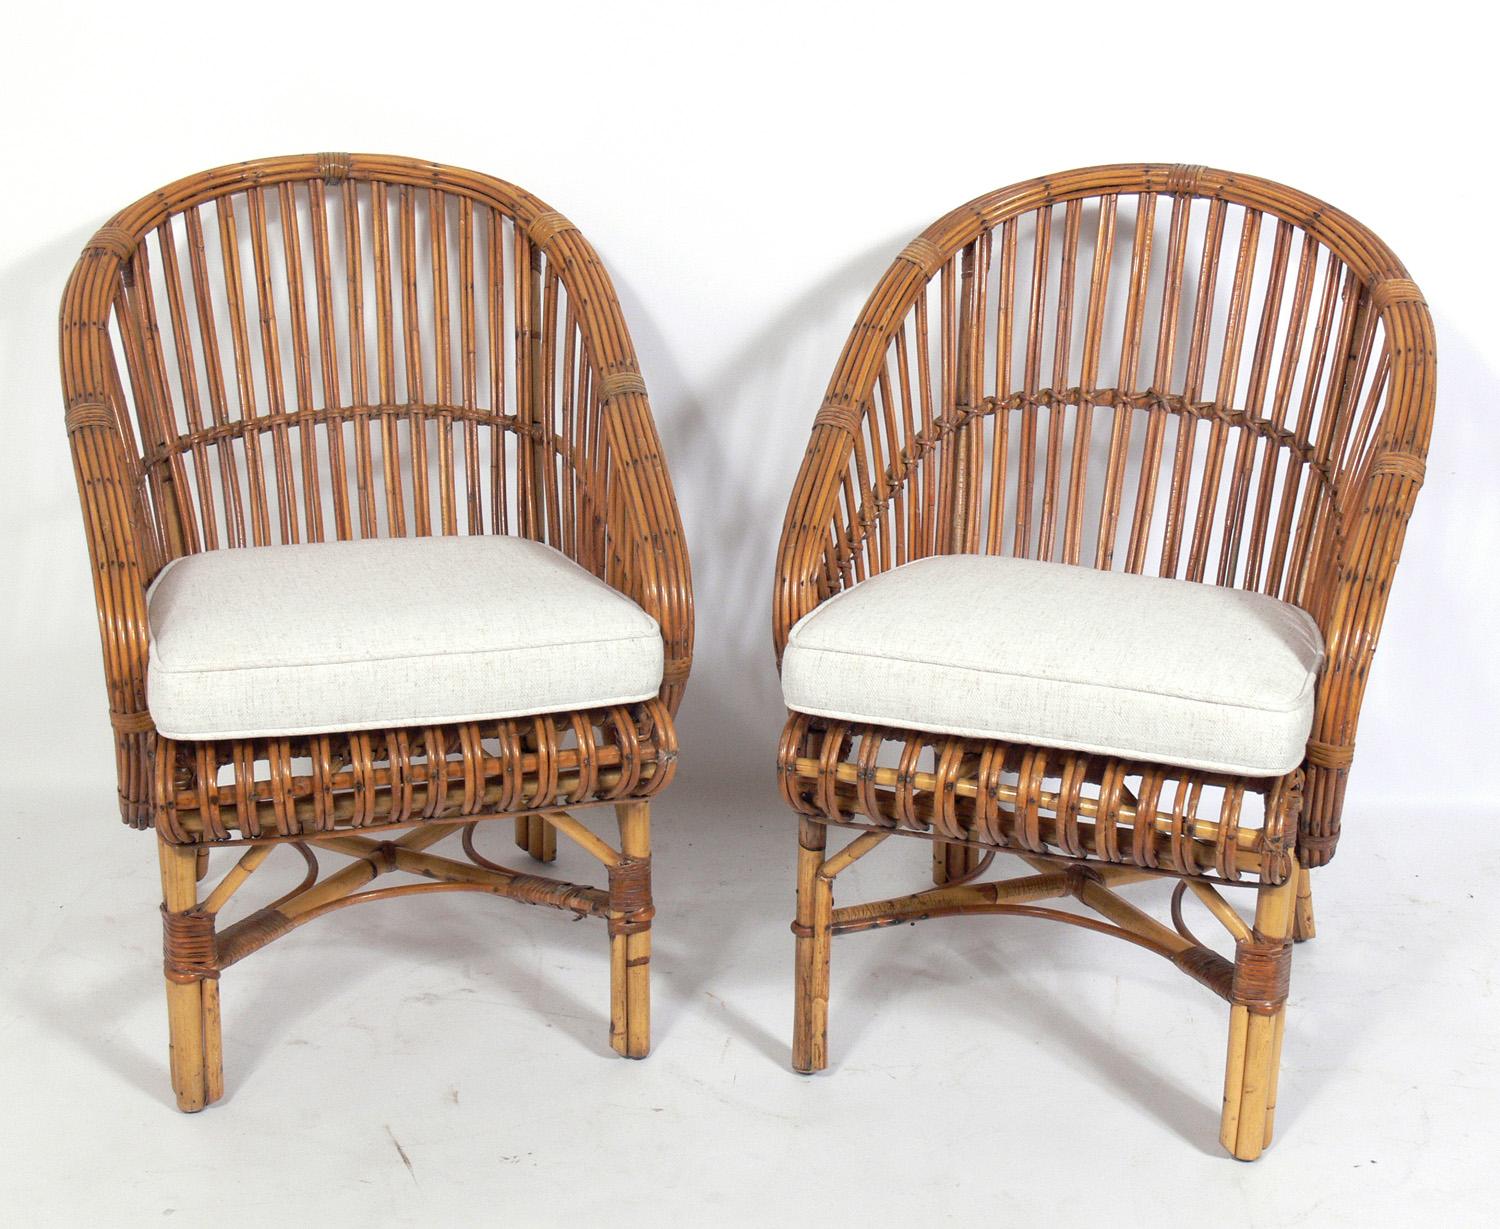 Italian Pair of Curvaceous Rattan Chairs